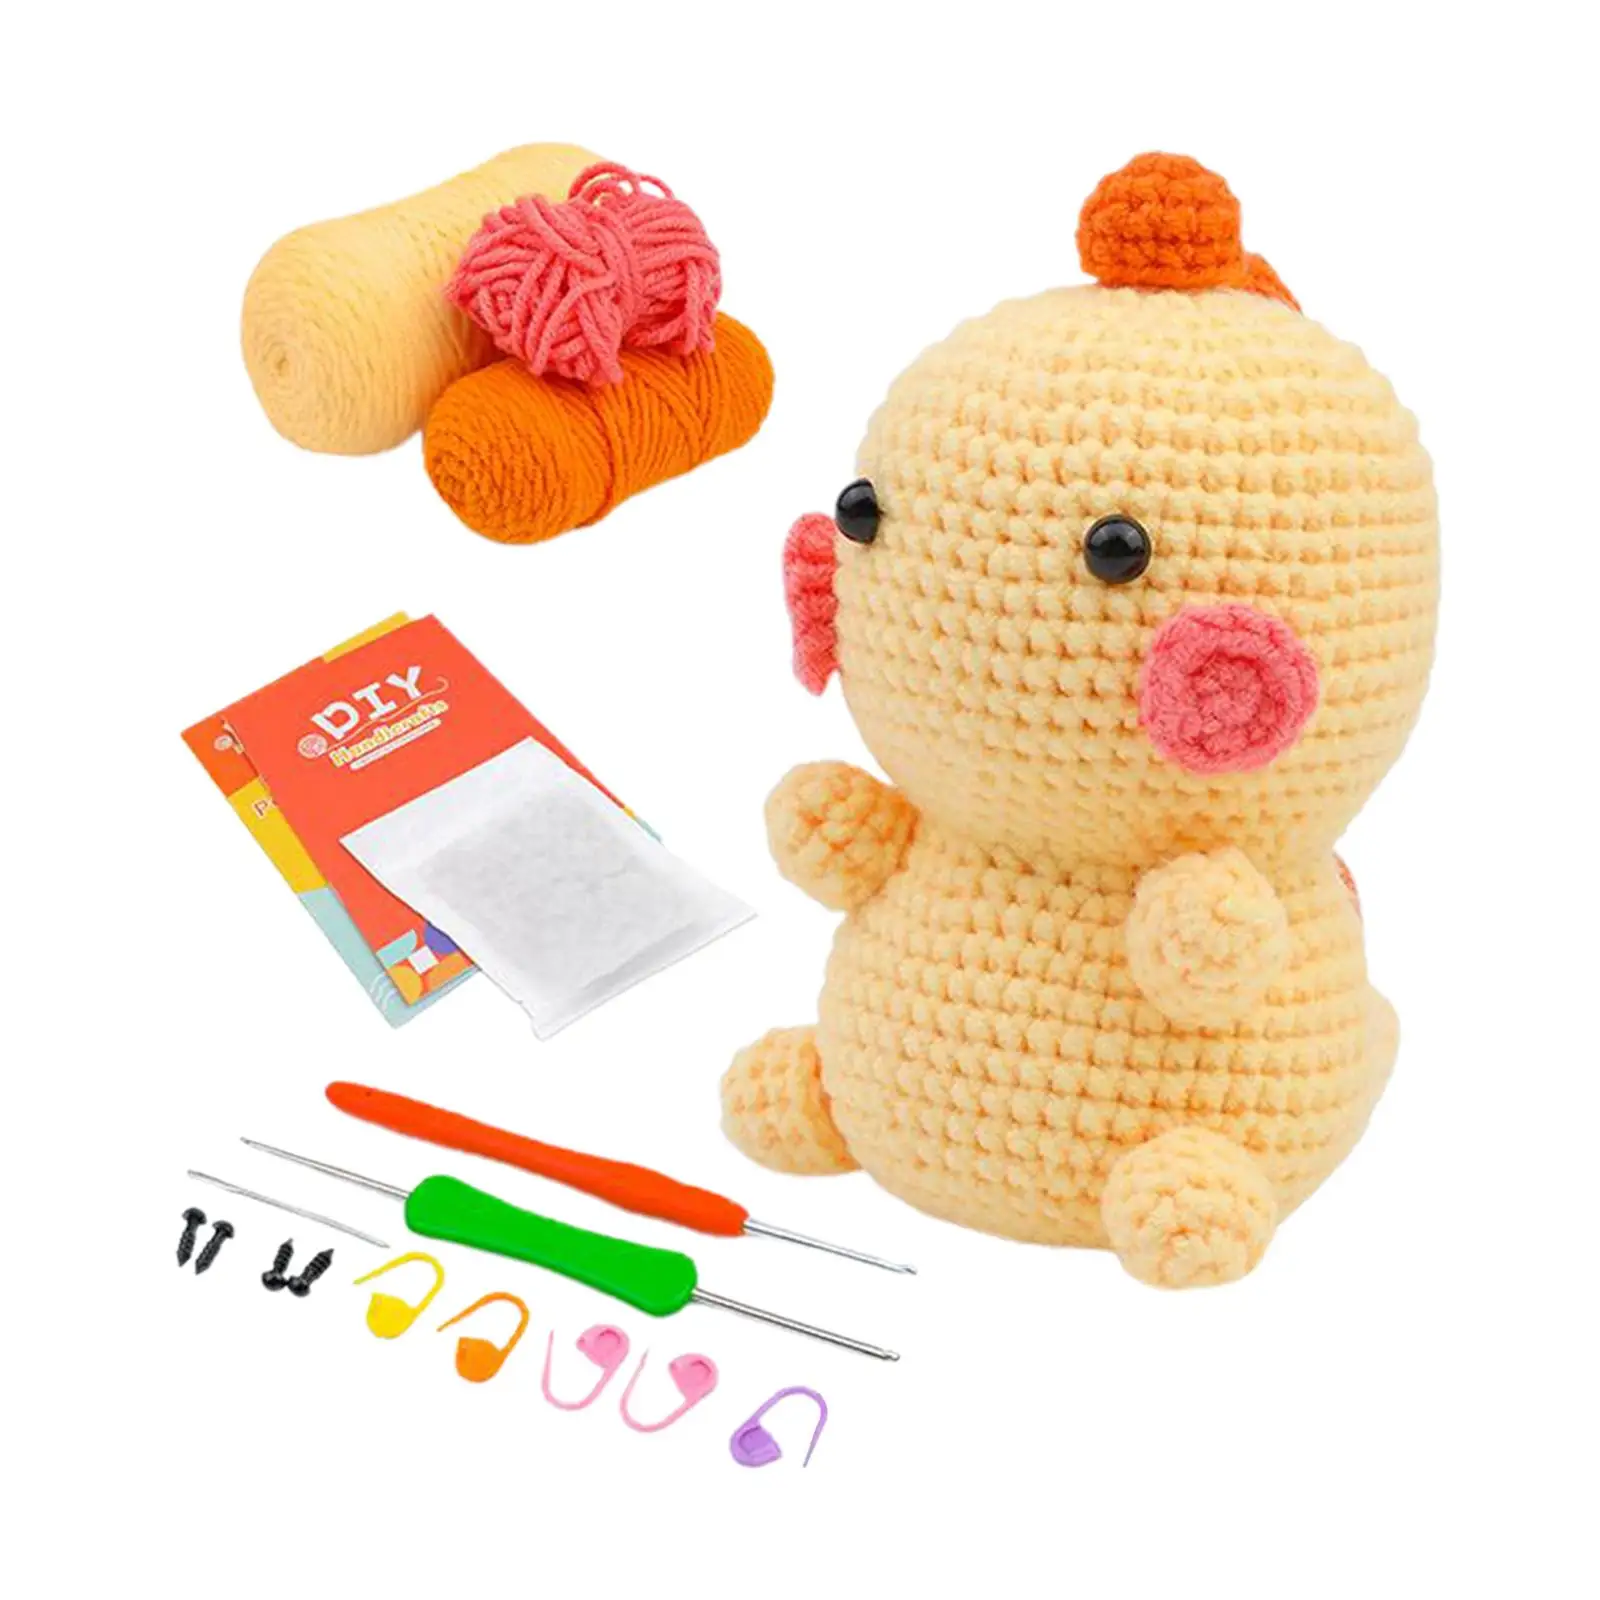 Crochet Animal Kit with Crochet Accessories Crochet Kit for Beginners Complete Material Pack for Kids Adults Knitting Enthusiast